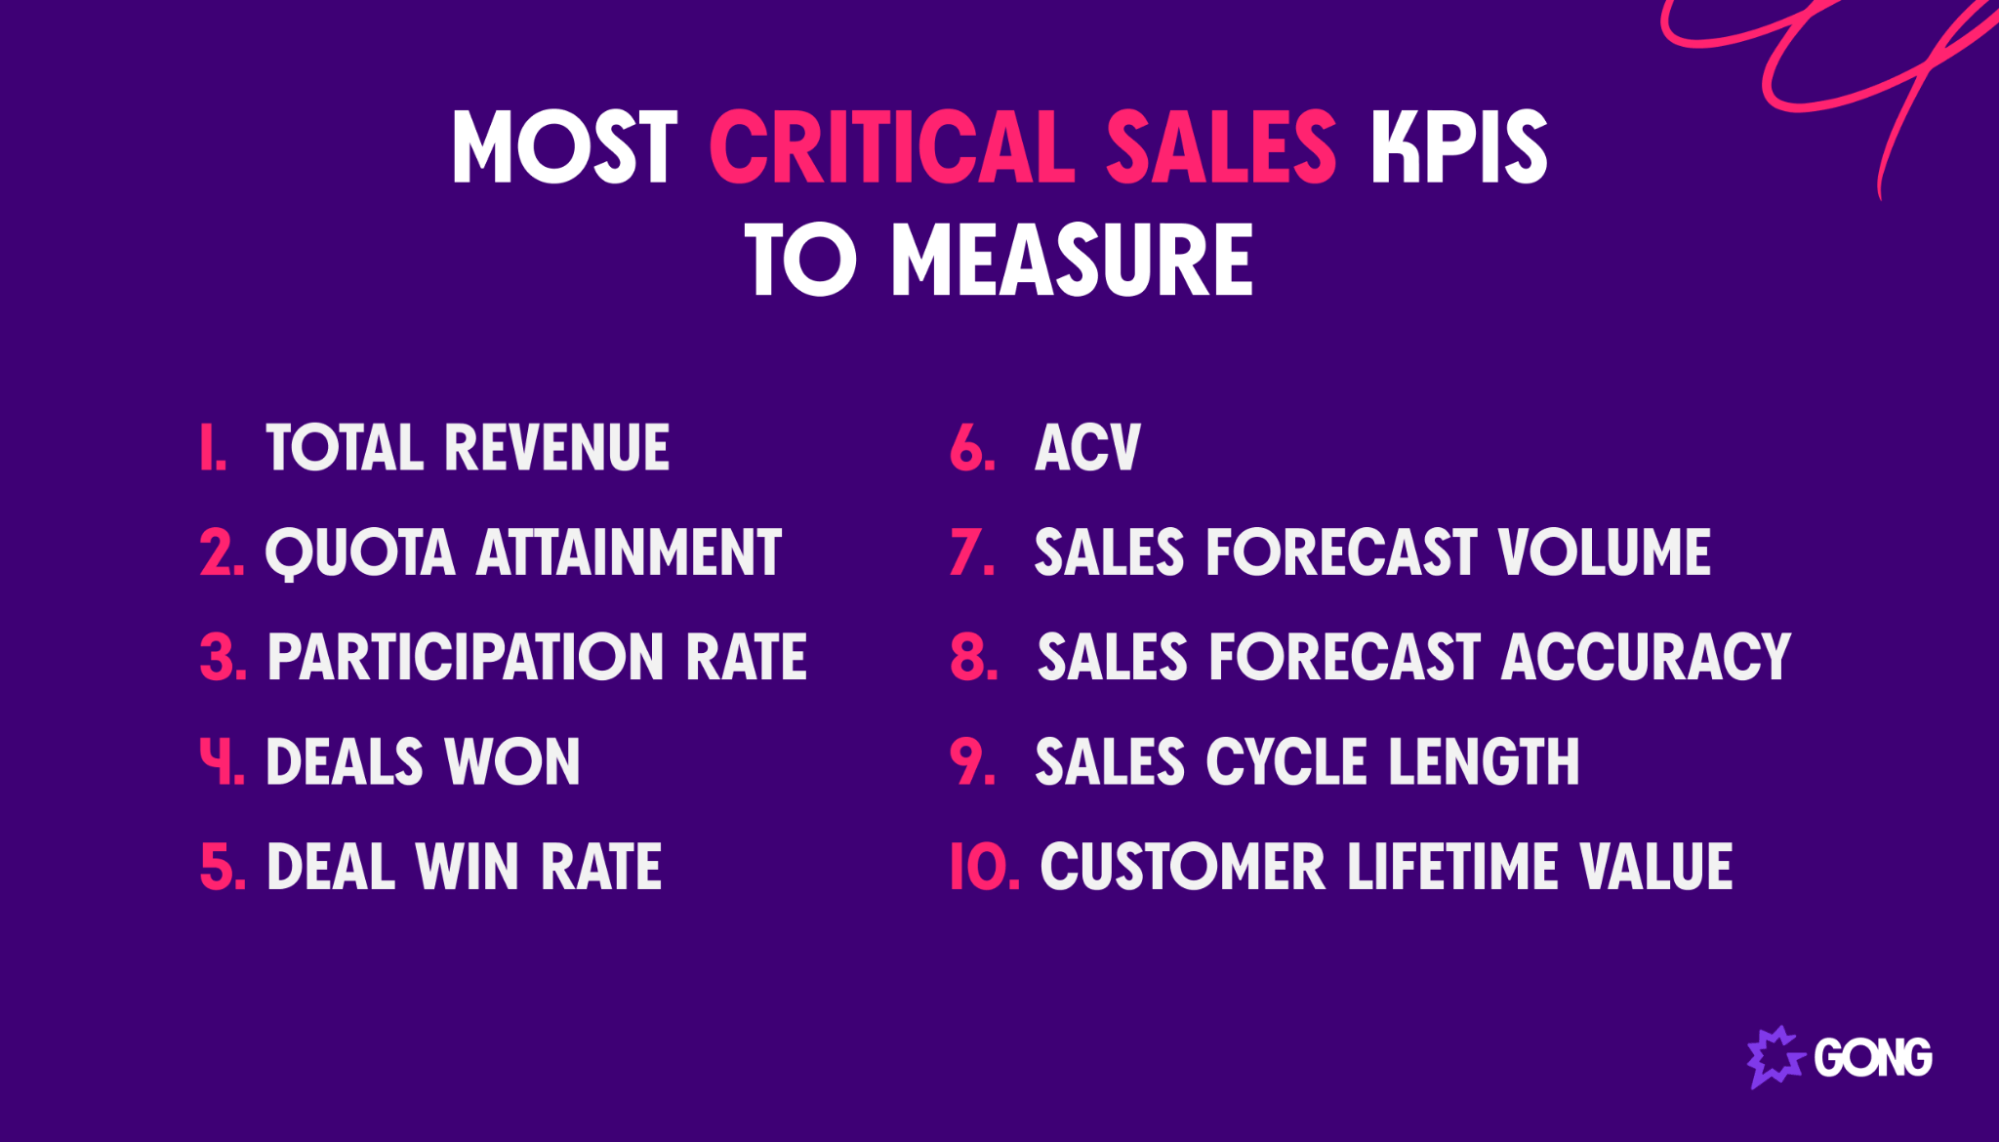 10 most critical sales KPIs to measure